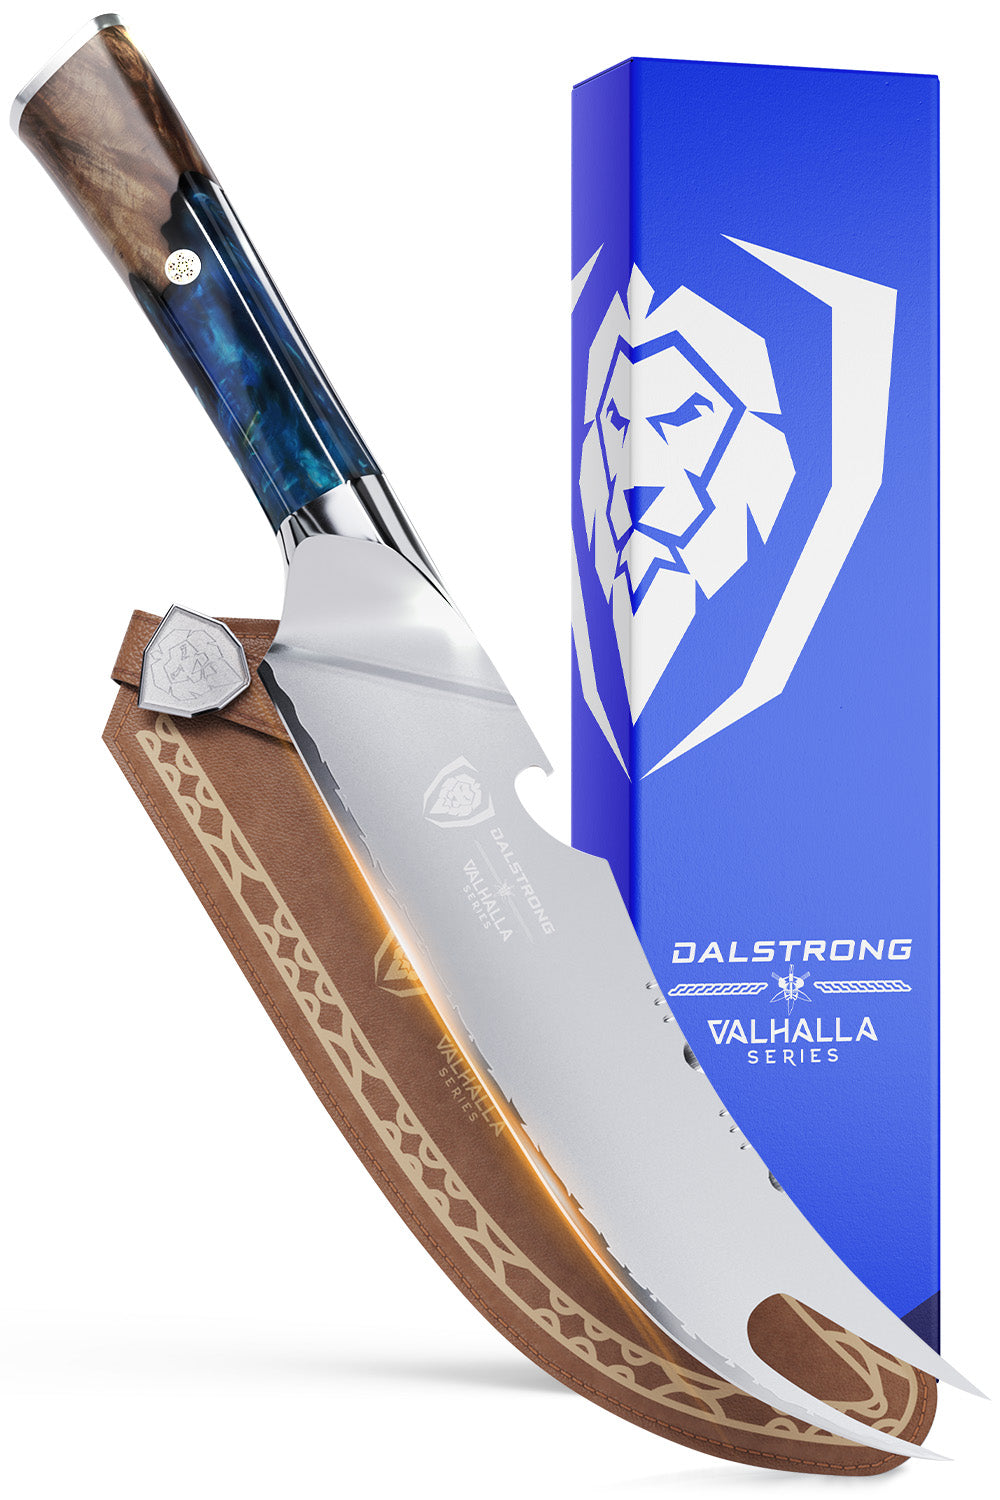 Pitmaster BBQ Knife 8" | Forked Tip | Valhalla Series | Dalstrong ©